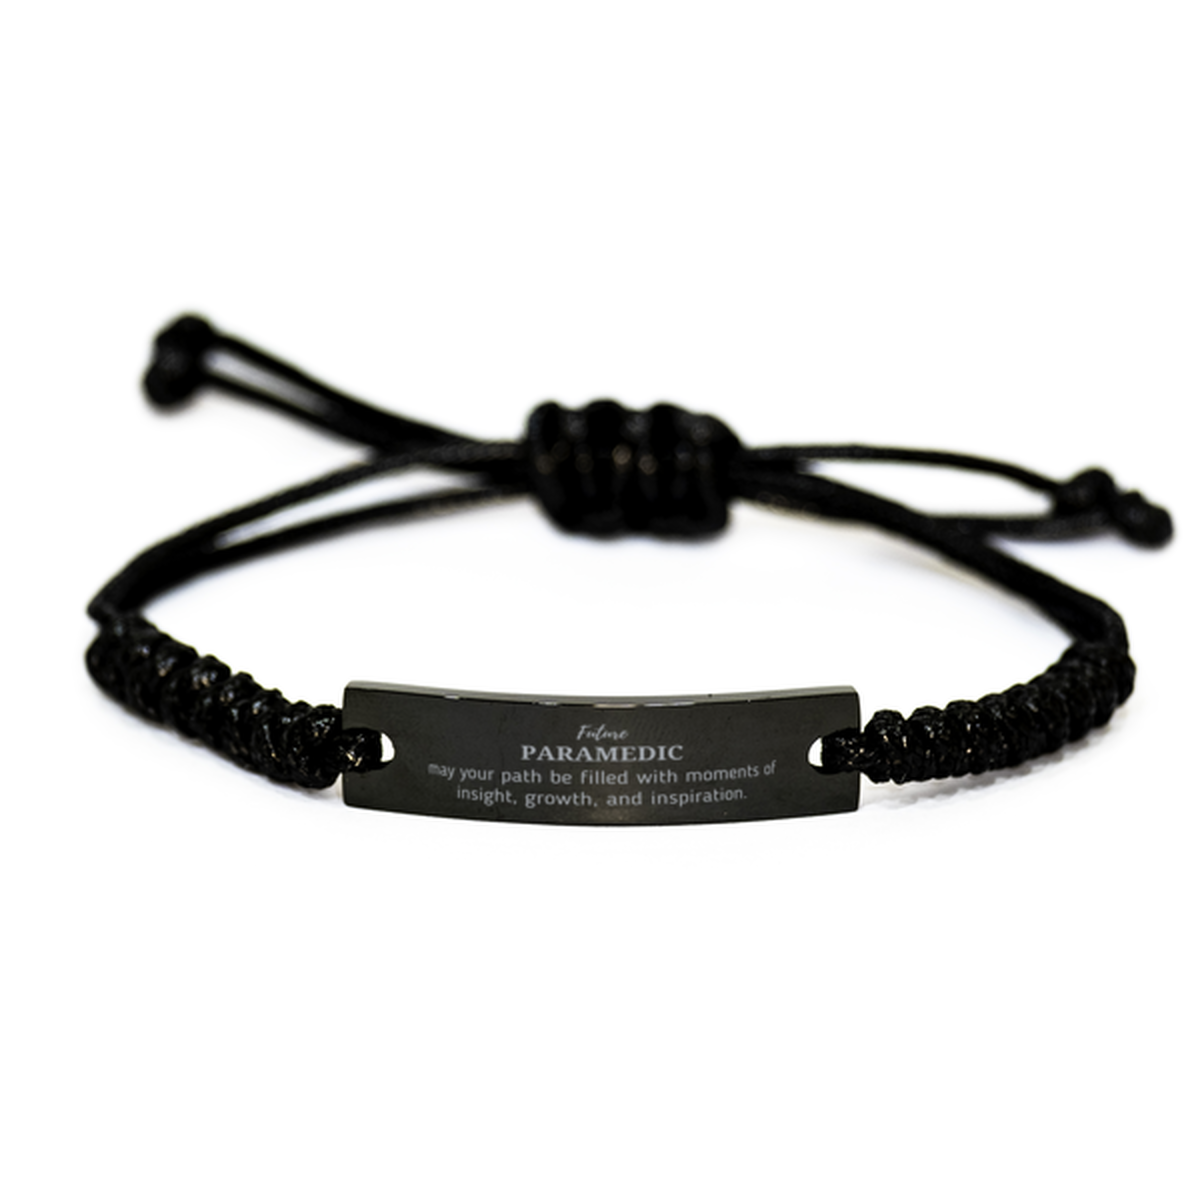 Future Paramedic Gifts, May your path be filled with moments of insight, Graduation Gifts for New Paramedic, Christmas Unique Black Rope Bracelet For Men, Women, Friends